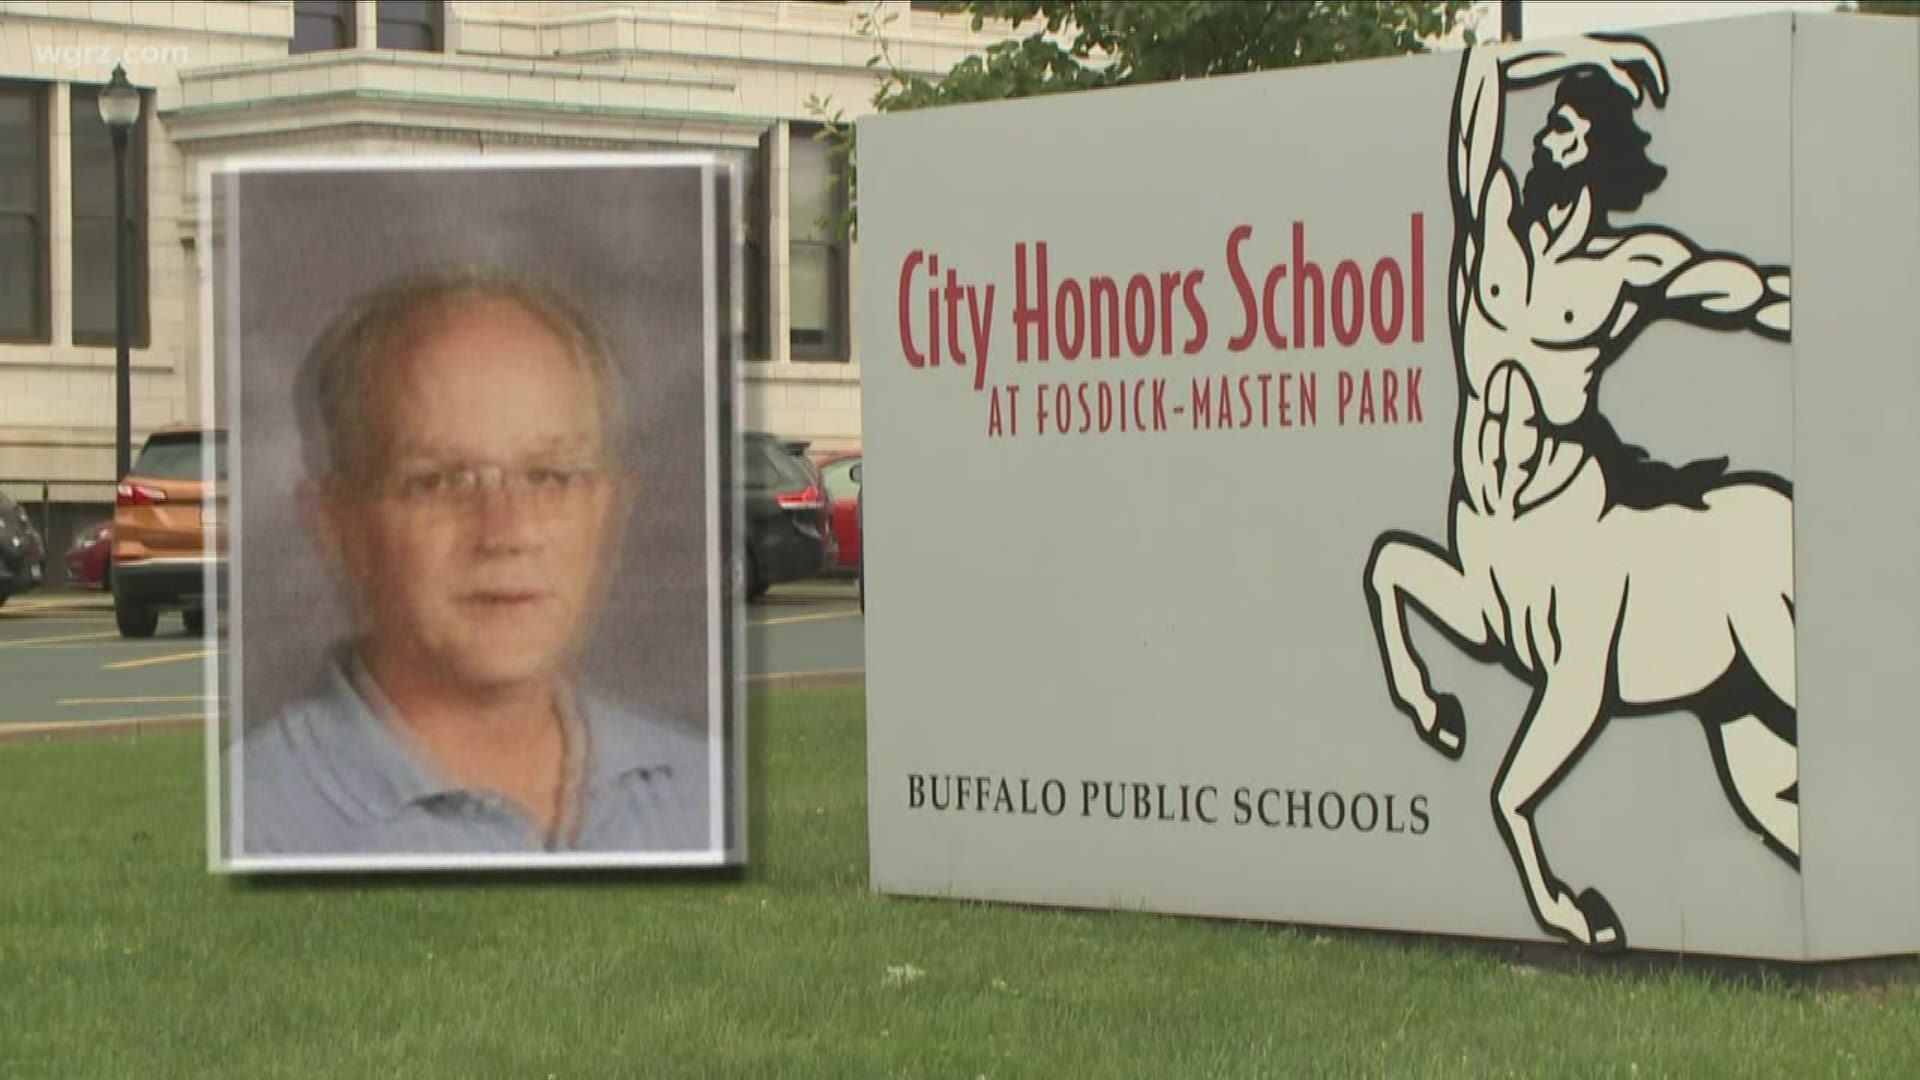 Teacher Porn Horse - Former City Honors teacher indicted on child porn charges | wgrz.com